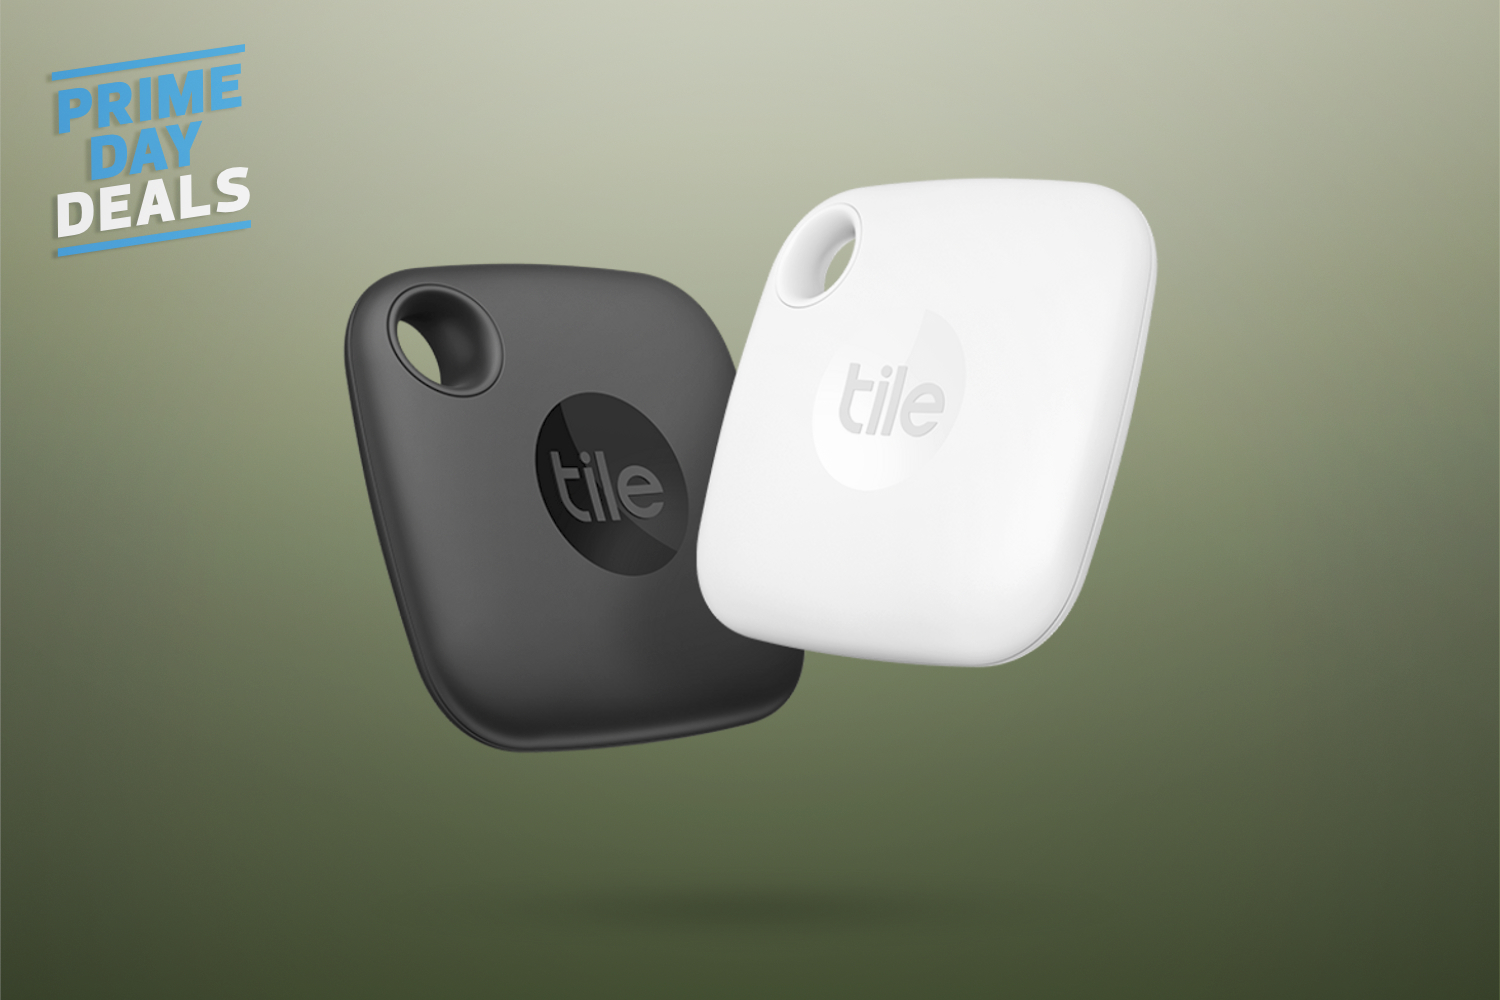 Find 30% savings on Tile's range of Bluetooth trackers during Prime Big  Deal Days